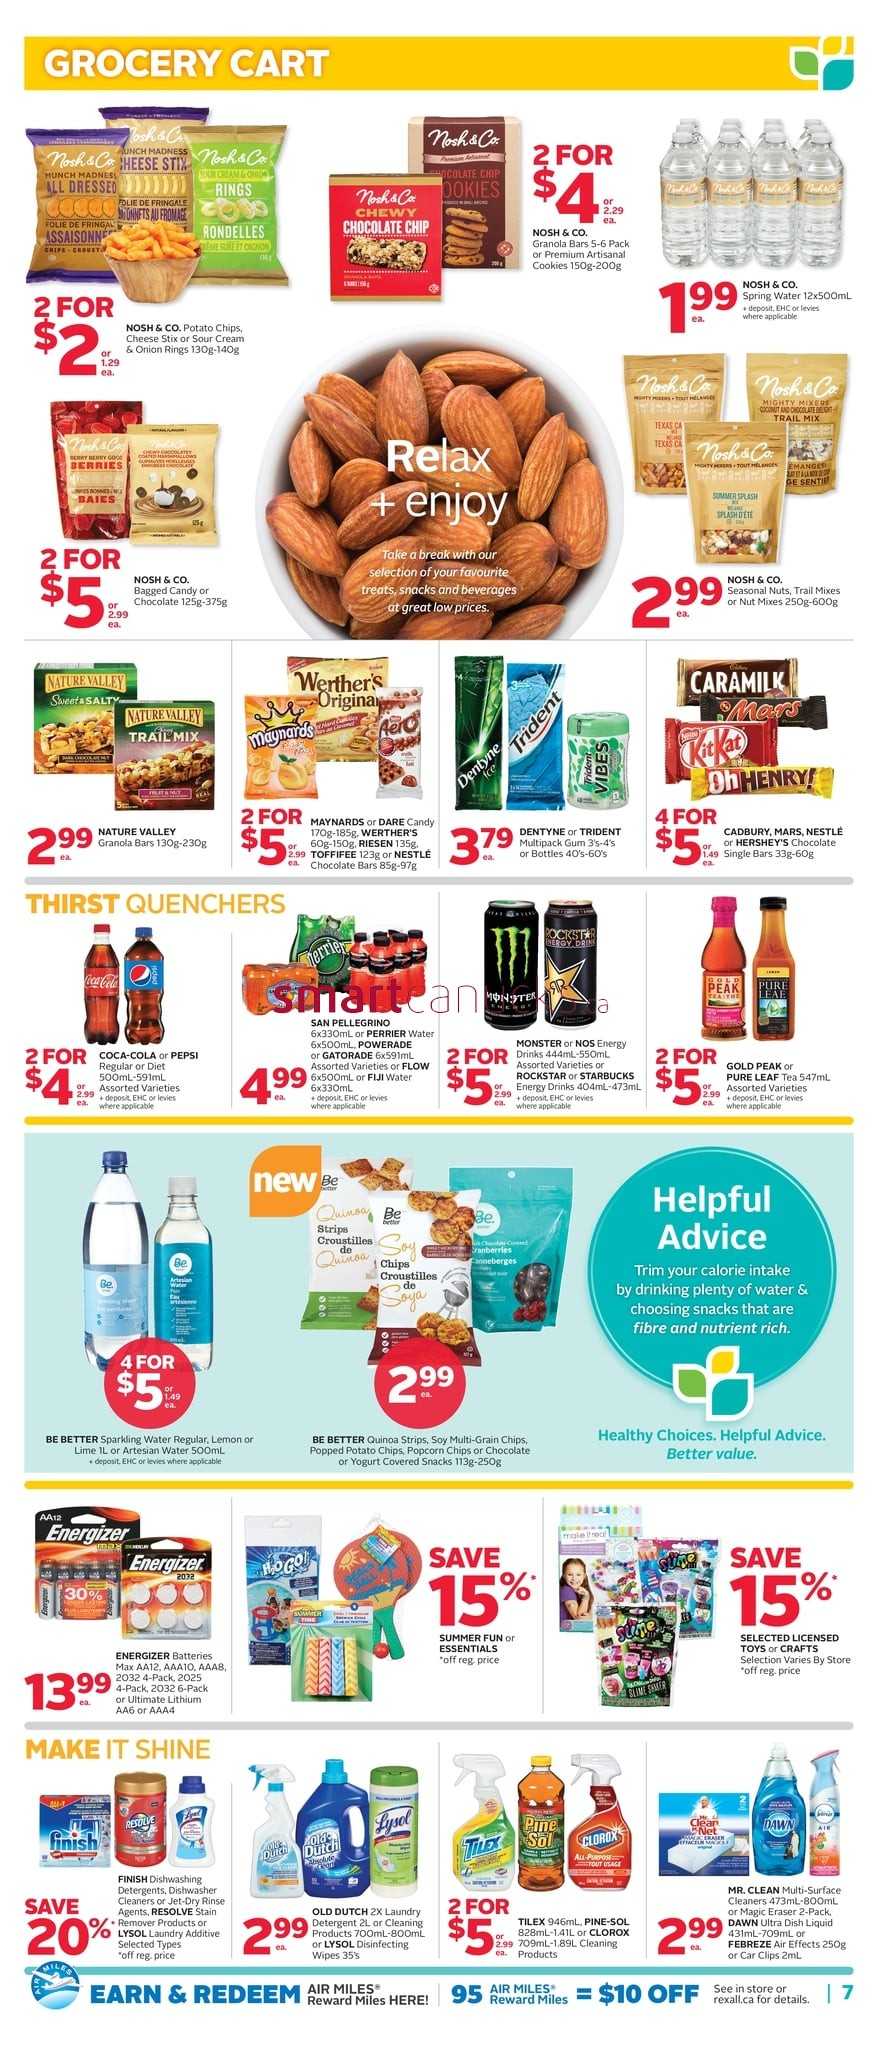 Rexall Drugstore (West) Flyer May 24 to 30